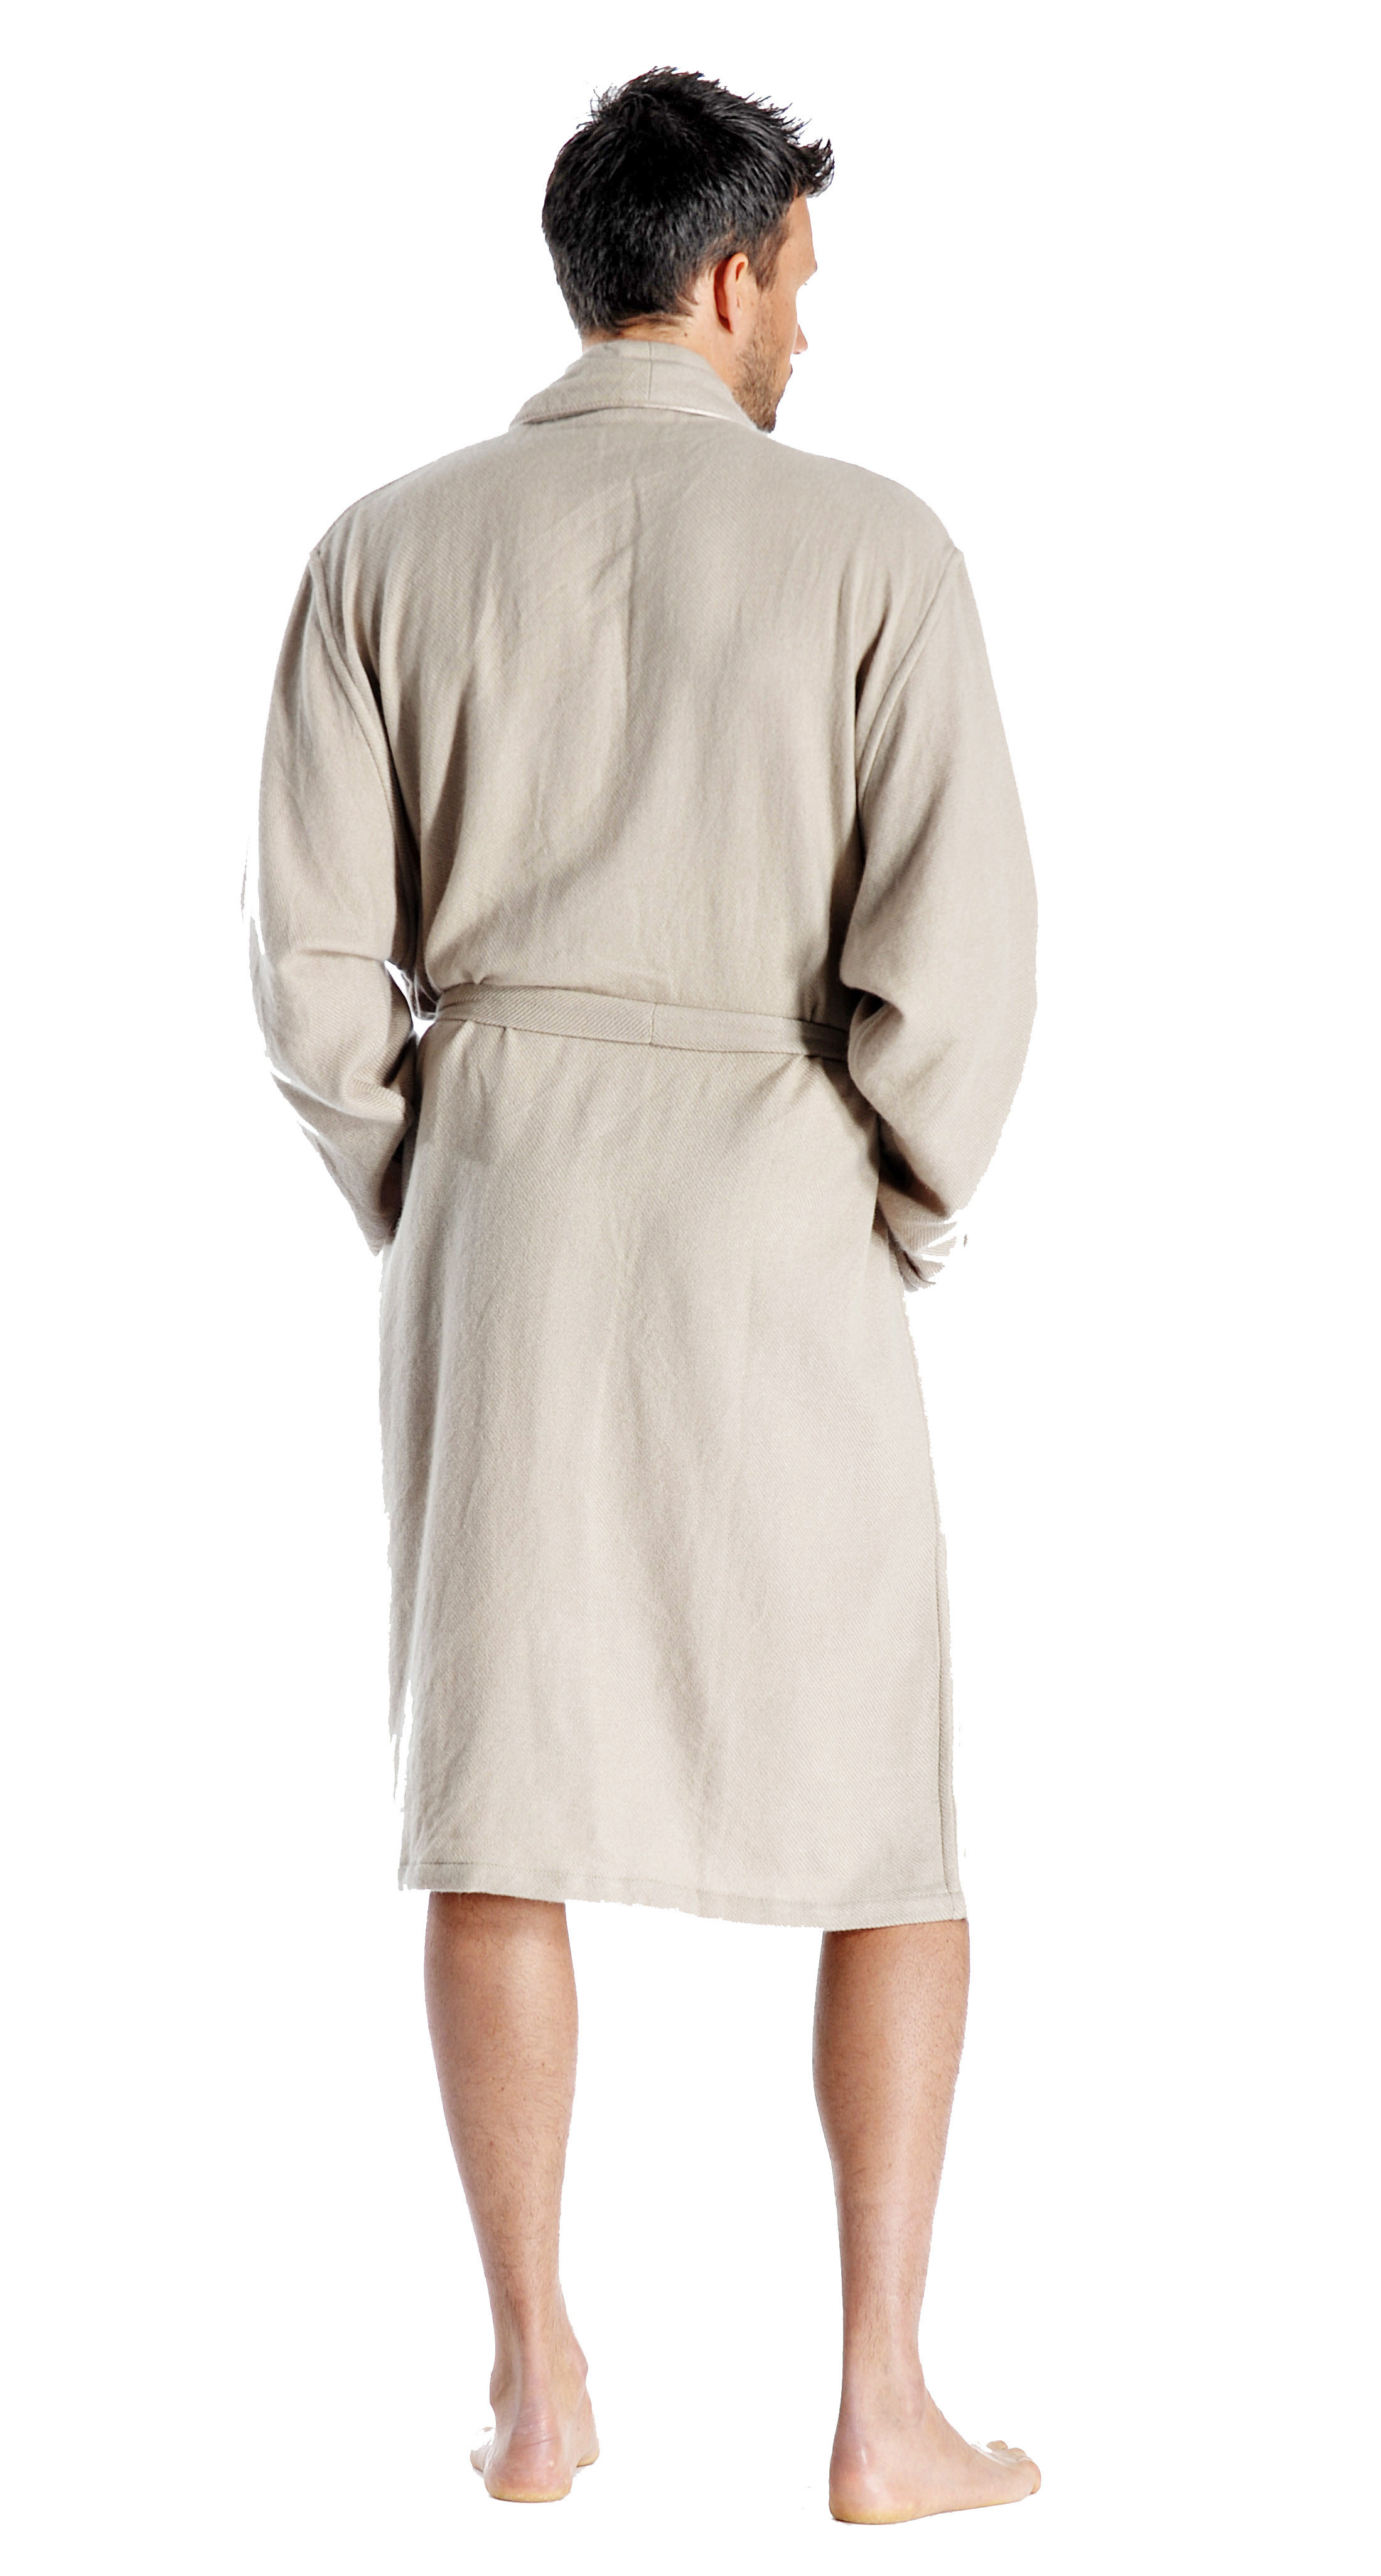 Pure Cashmere Knee Length Robe for Men (Charcoal, Small/Medium)